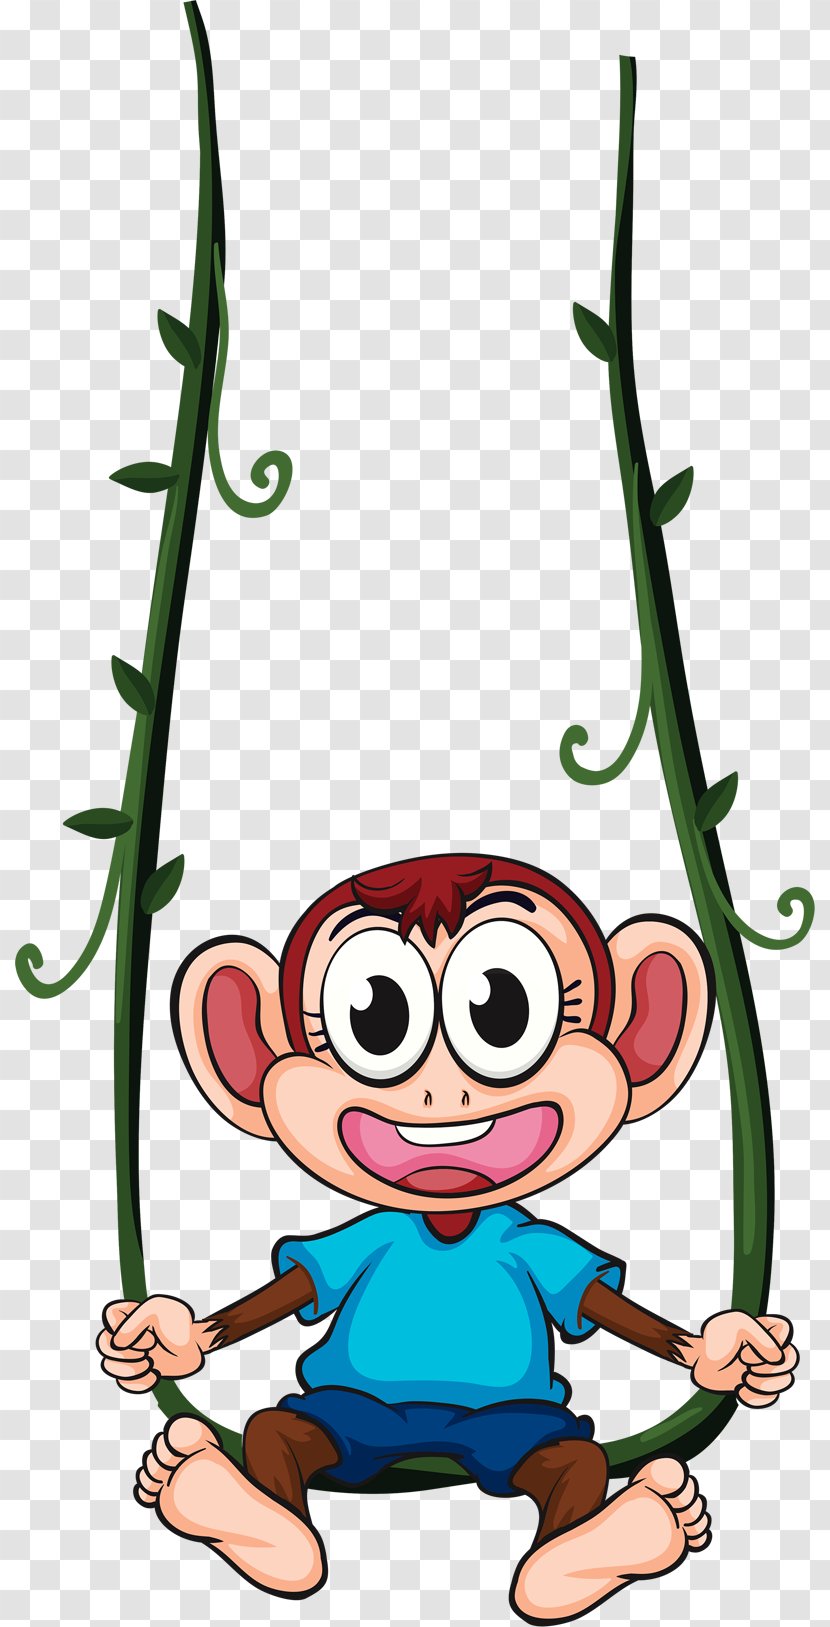 Royalty-free Drawing Clip Art - Funny Animal - Monkey Transparent PNG